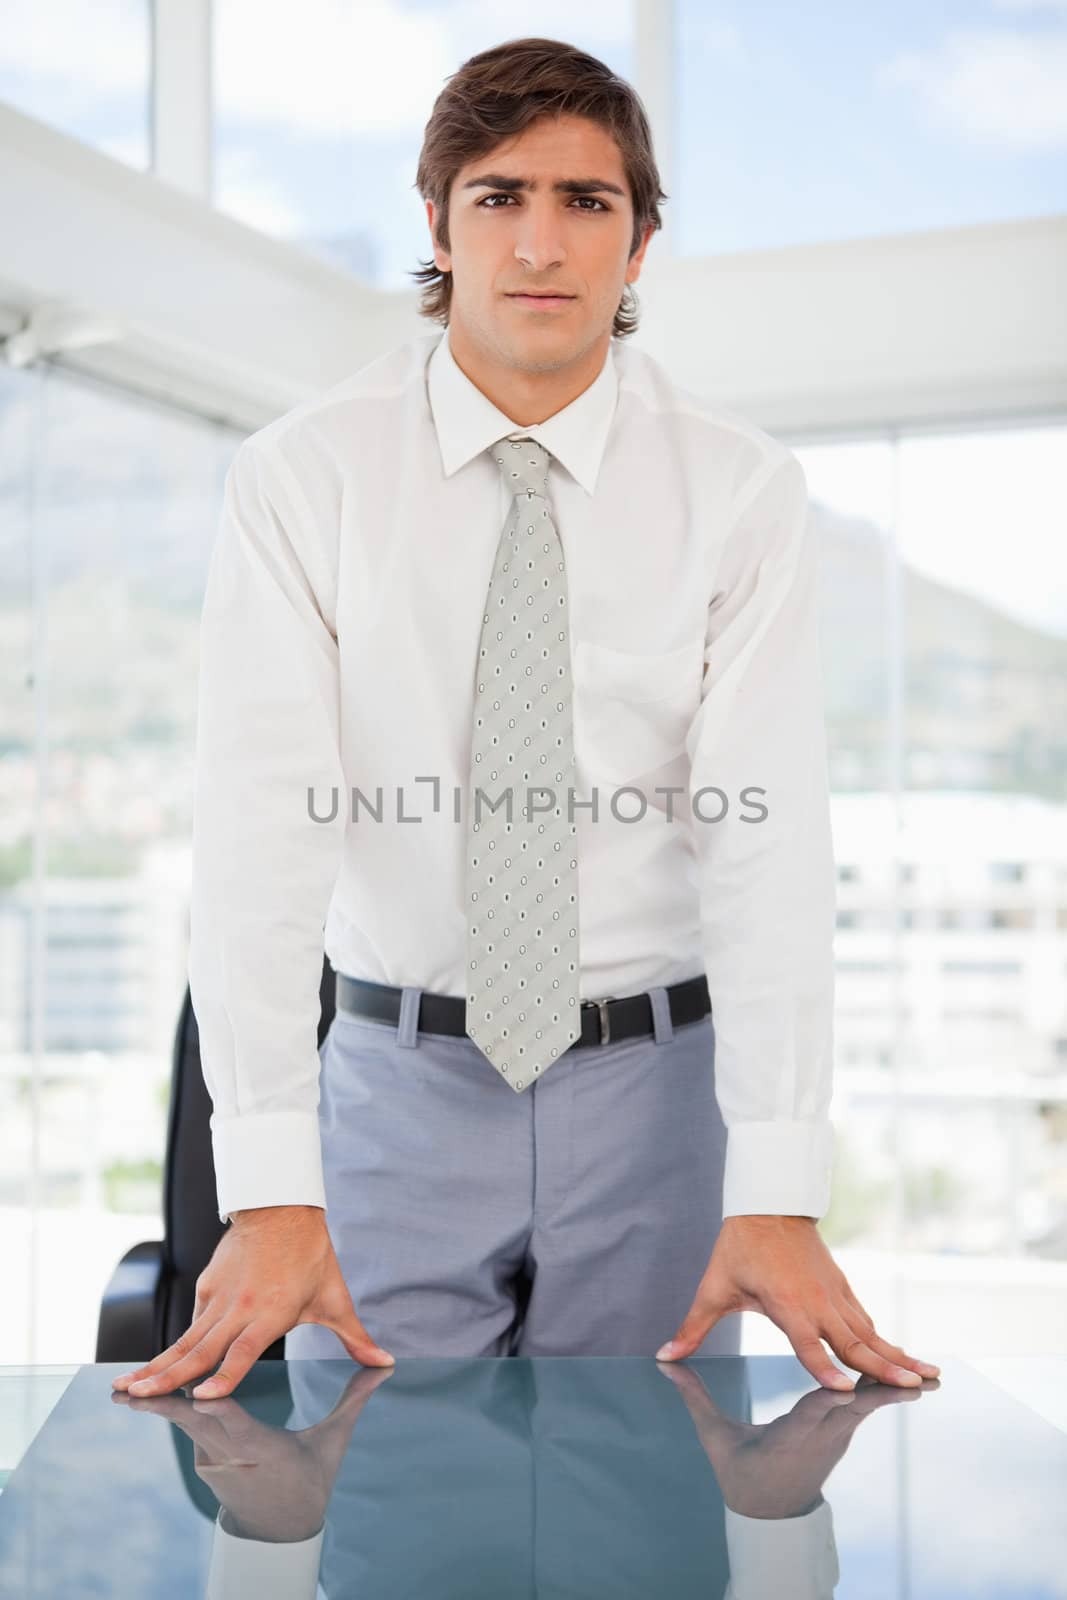 Serious businessman leaning on a table by Wavebreakmedia